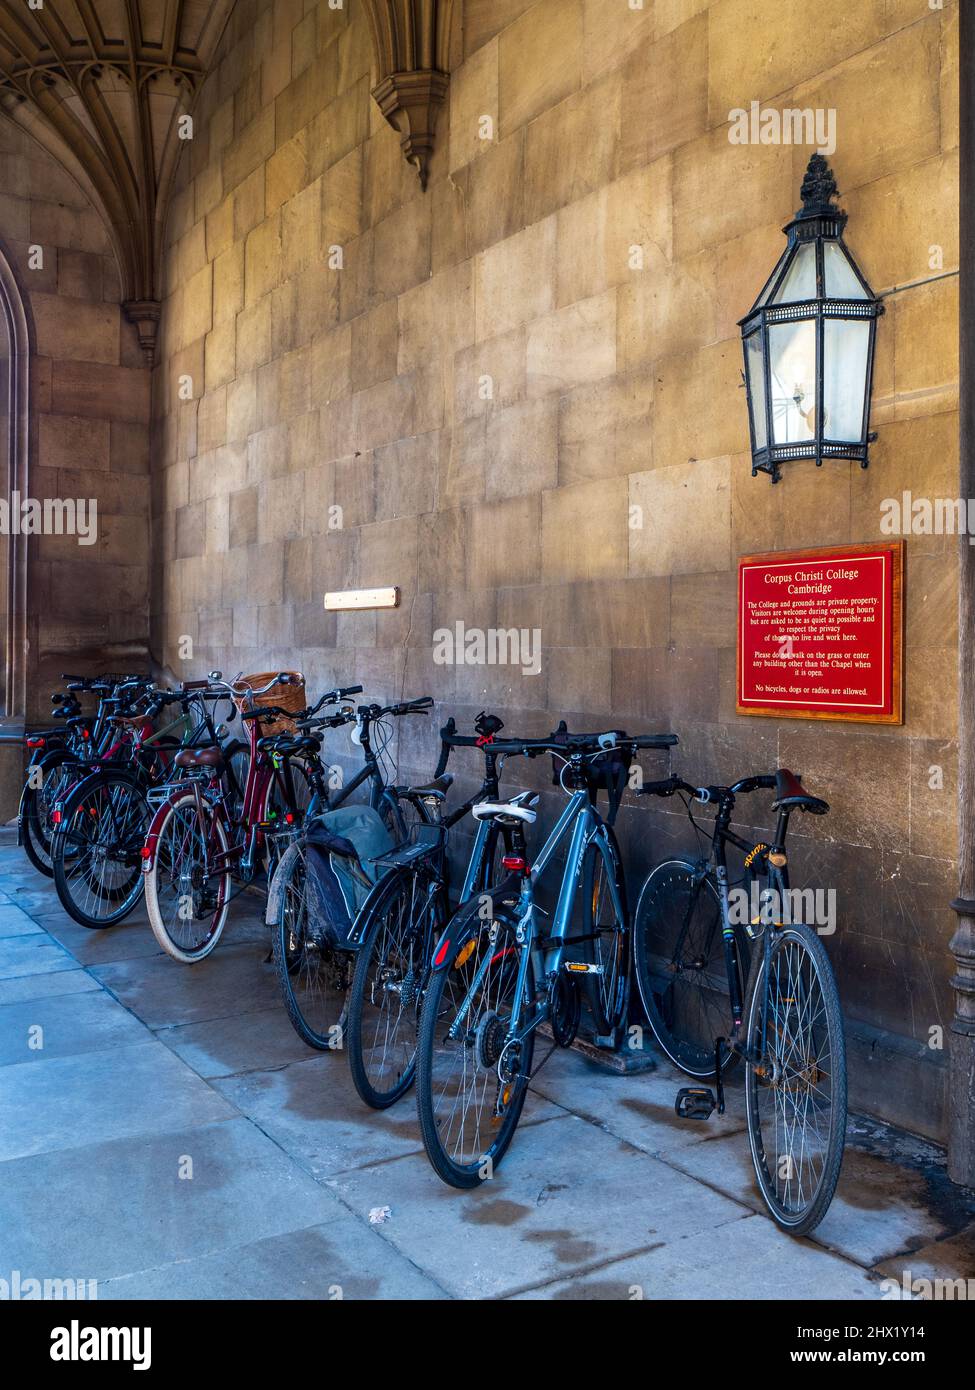 Cambridge Student Bikes - Bikes parked in the entrance to Corpus Christi College. part of the University of Cambridge. Stock Photo